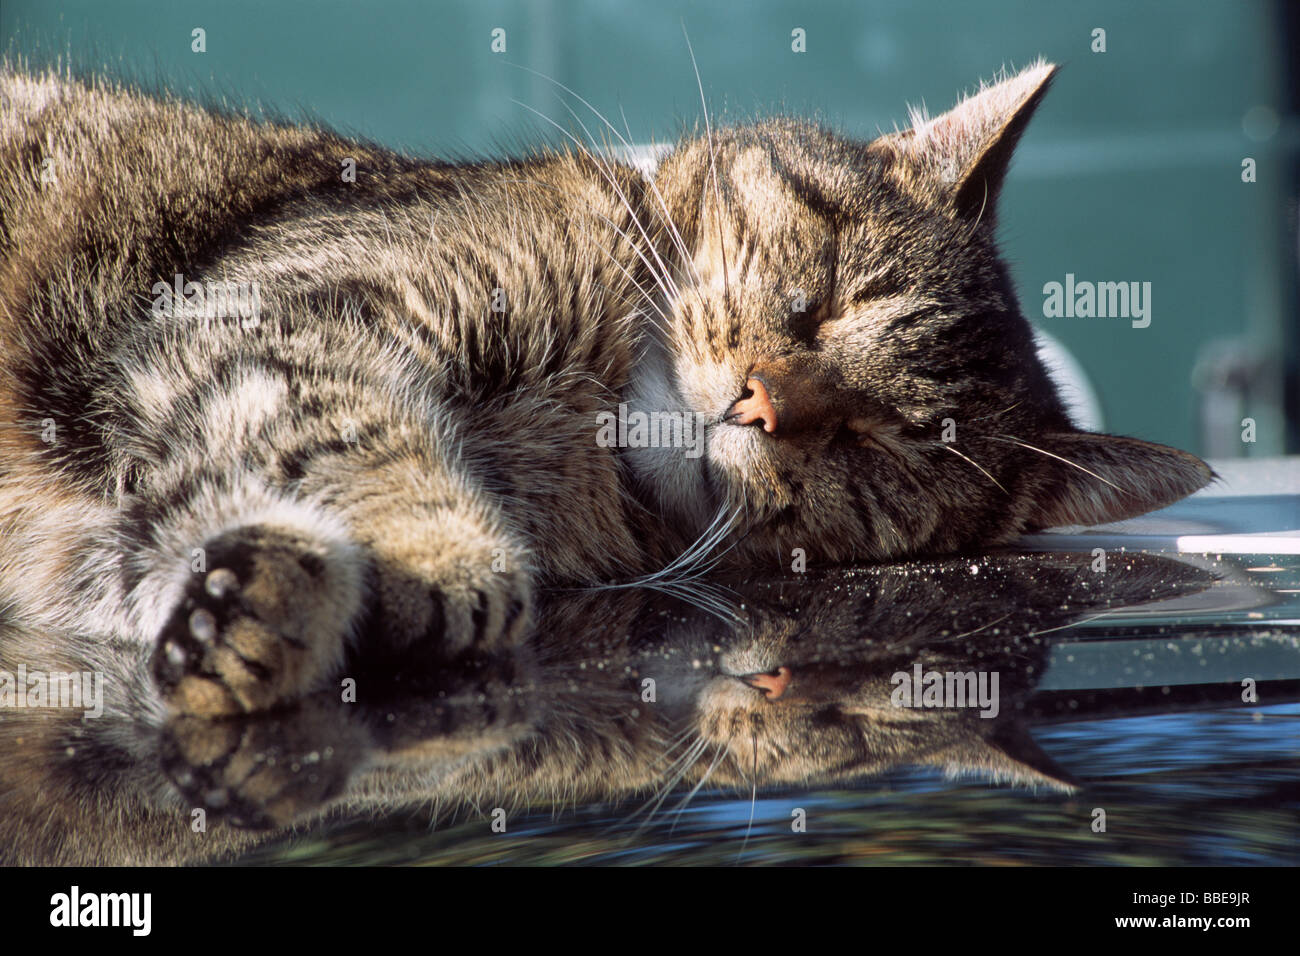 Domestic cat sleeping on car roof, reflection Stock Photo